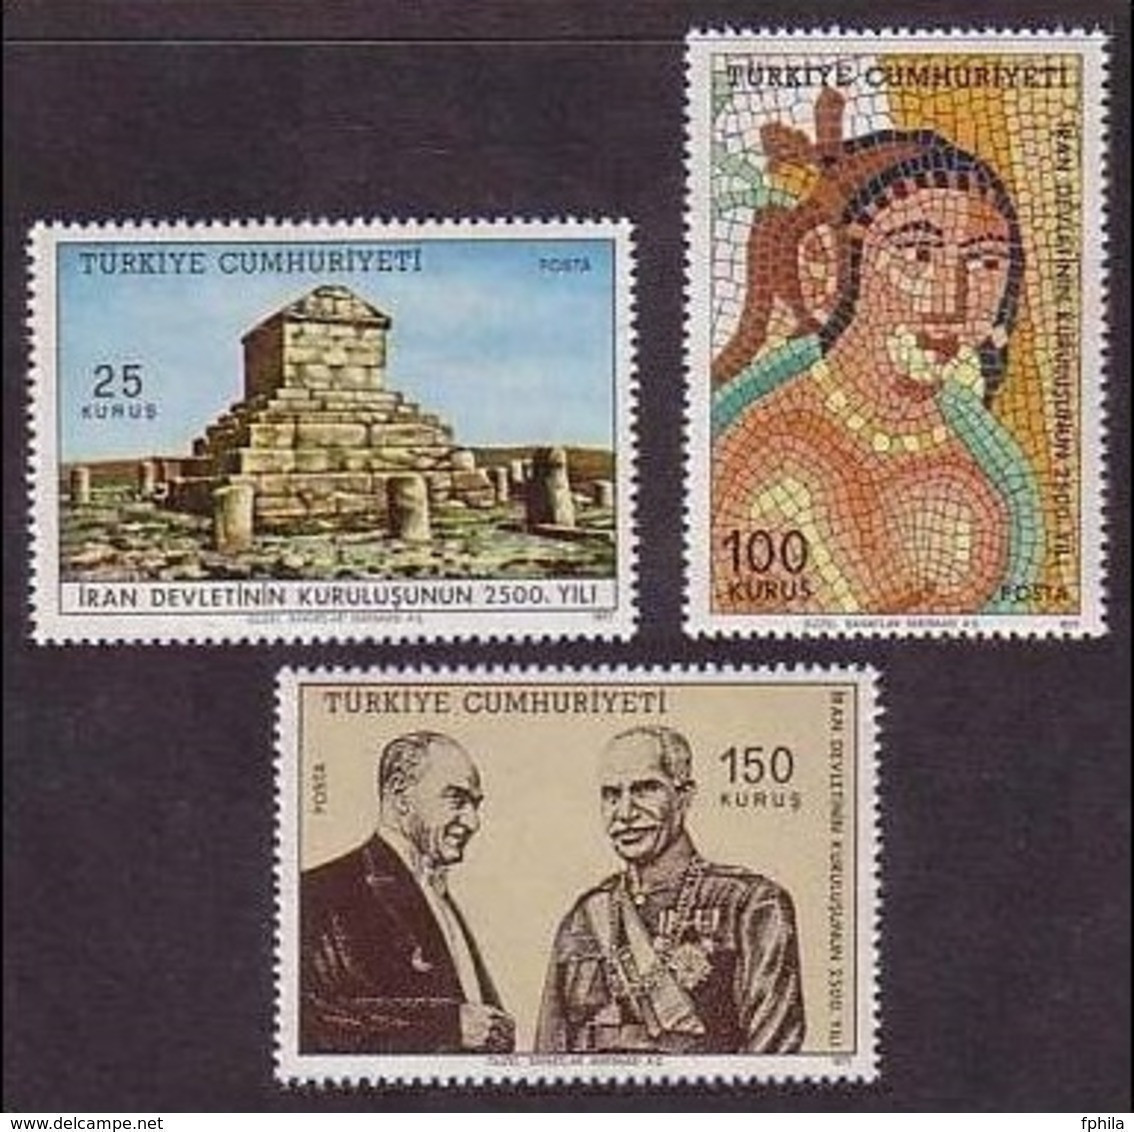 1971 TURKEY 2500TH ANNIVERSARY OF THE IRANIAN MONARCHY'S FOUNDATION MNH ** - Unused Stamps